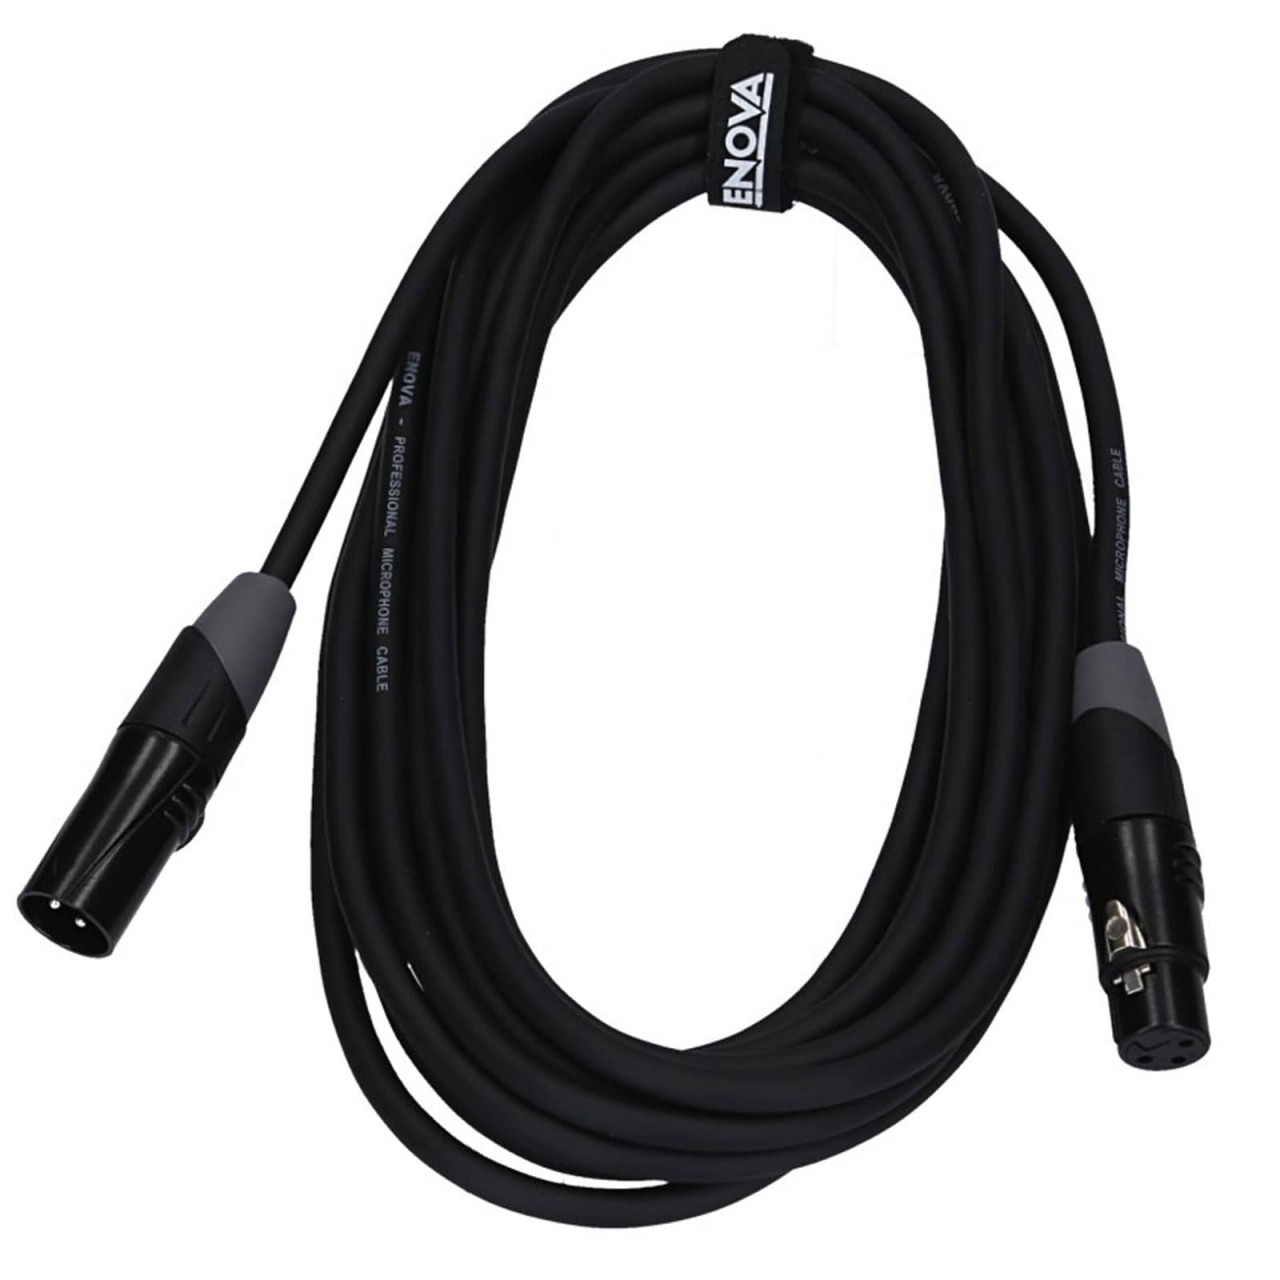 3 m XLR cable - For professional audio transmission. balanced XLR cable 3 meters  